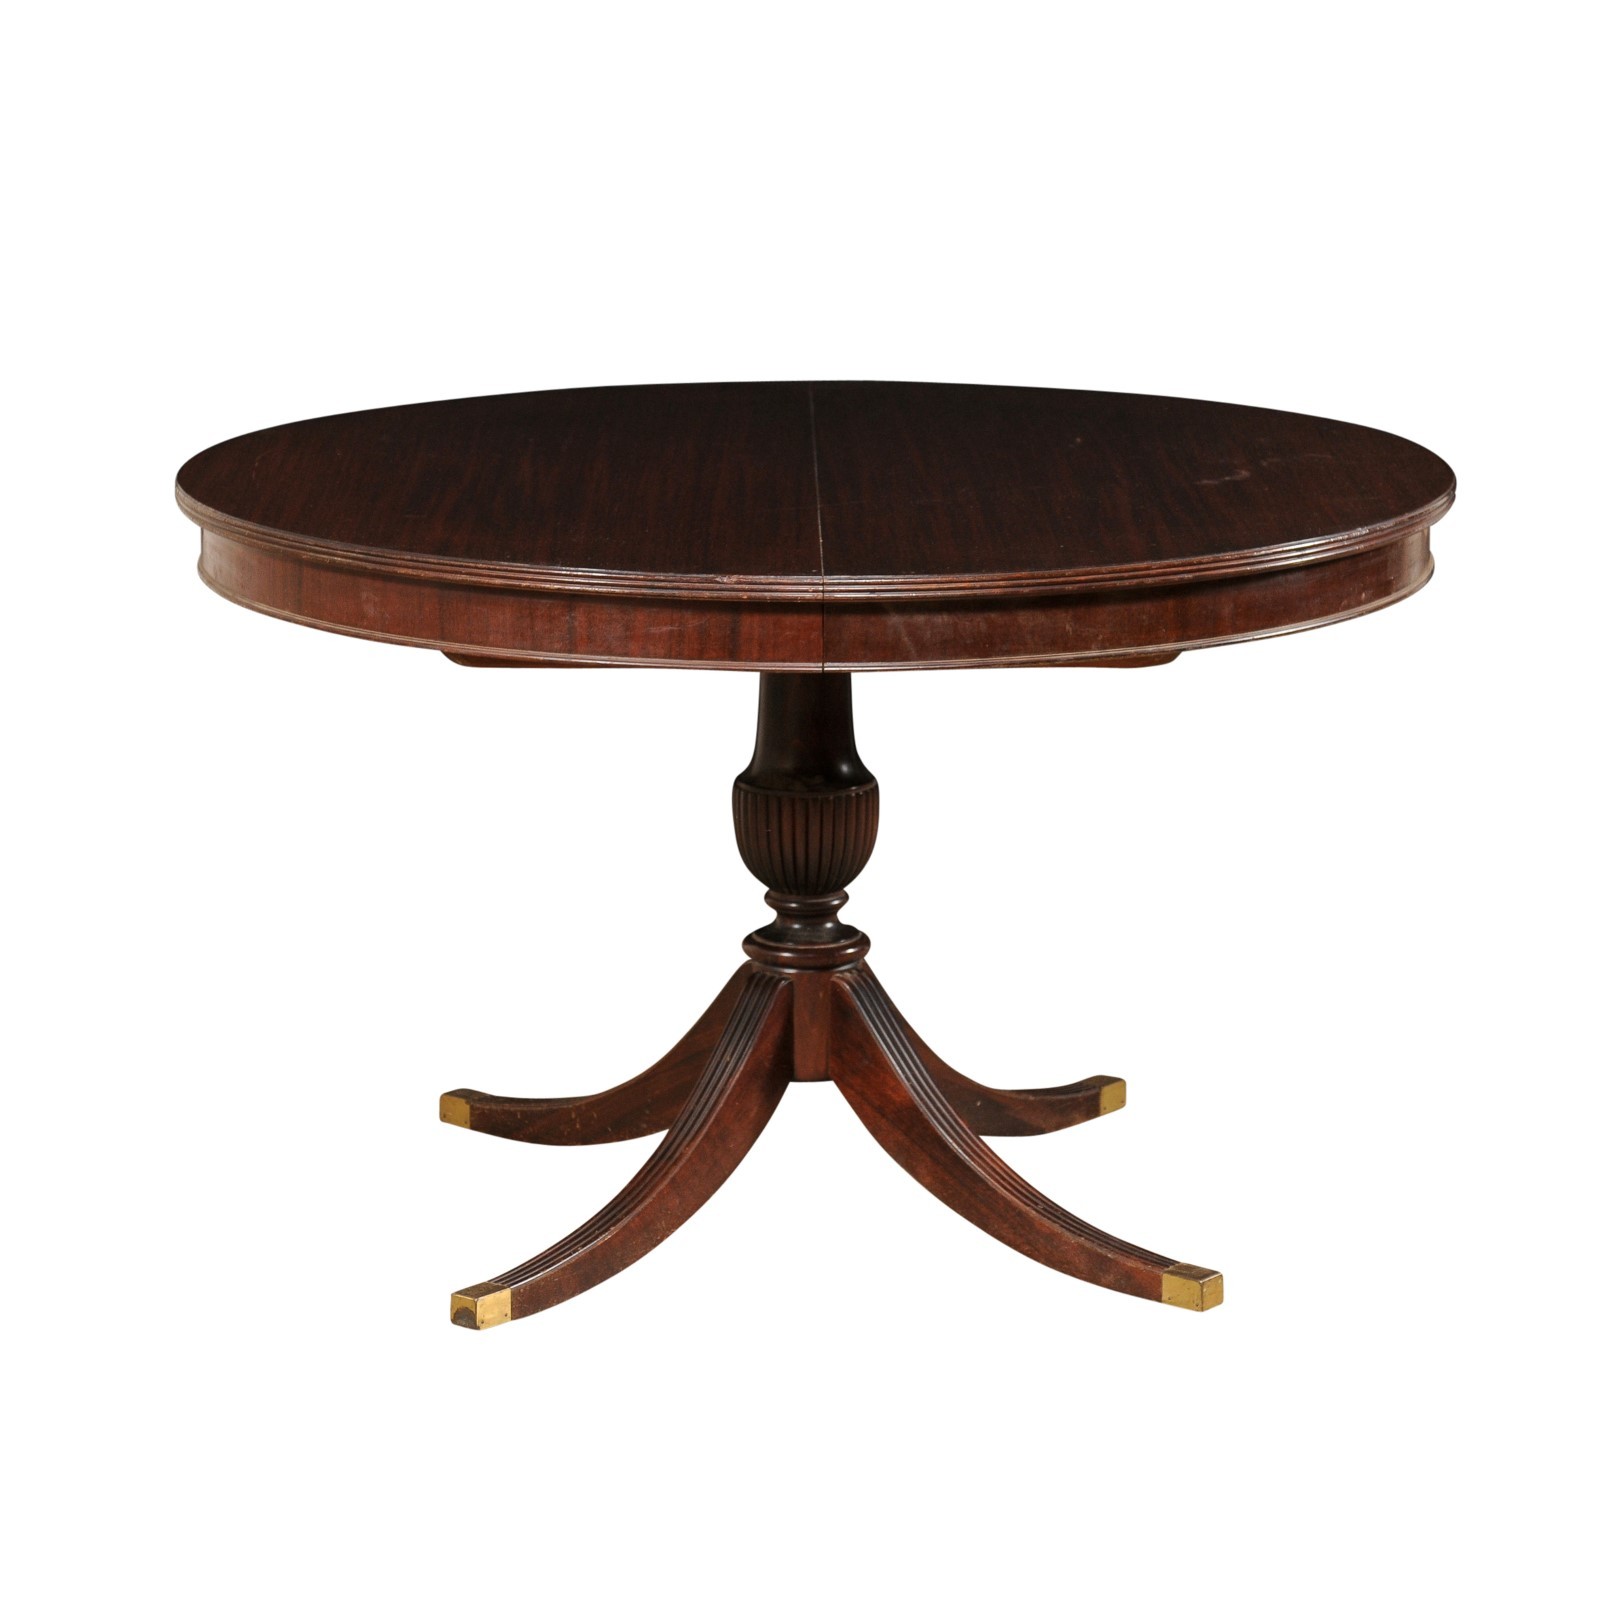 English Pedestal Table, Round to Oval Shape